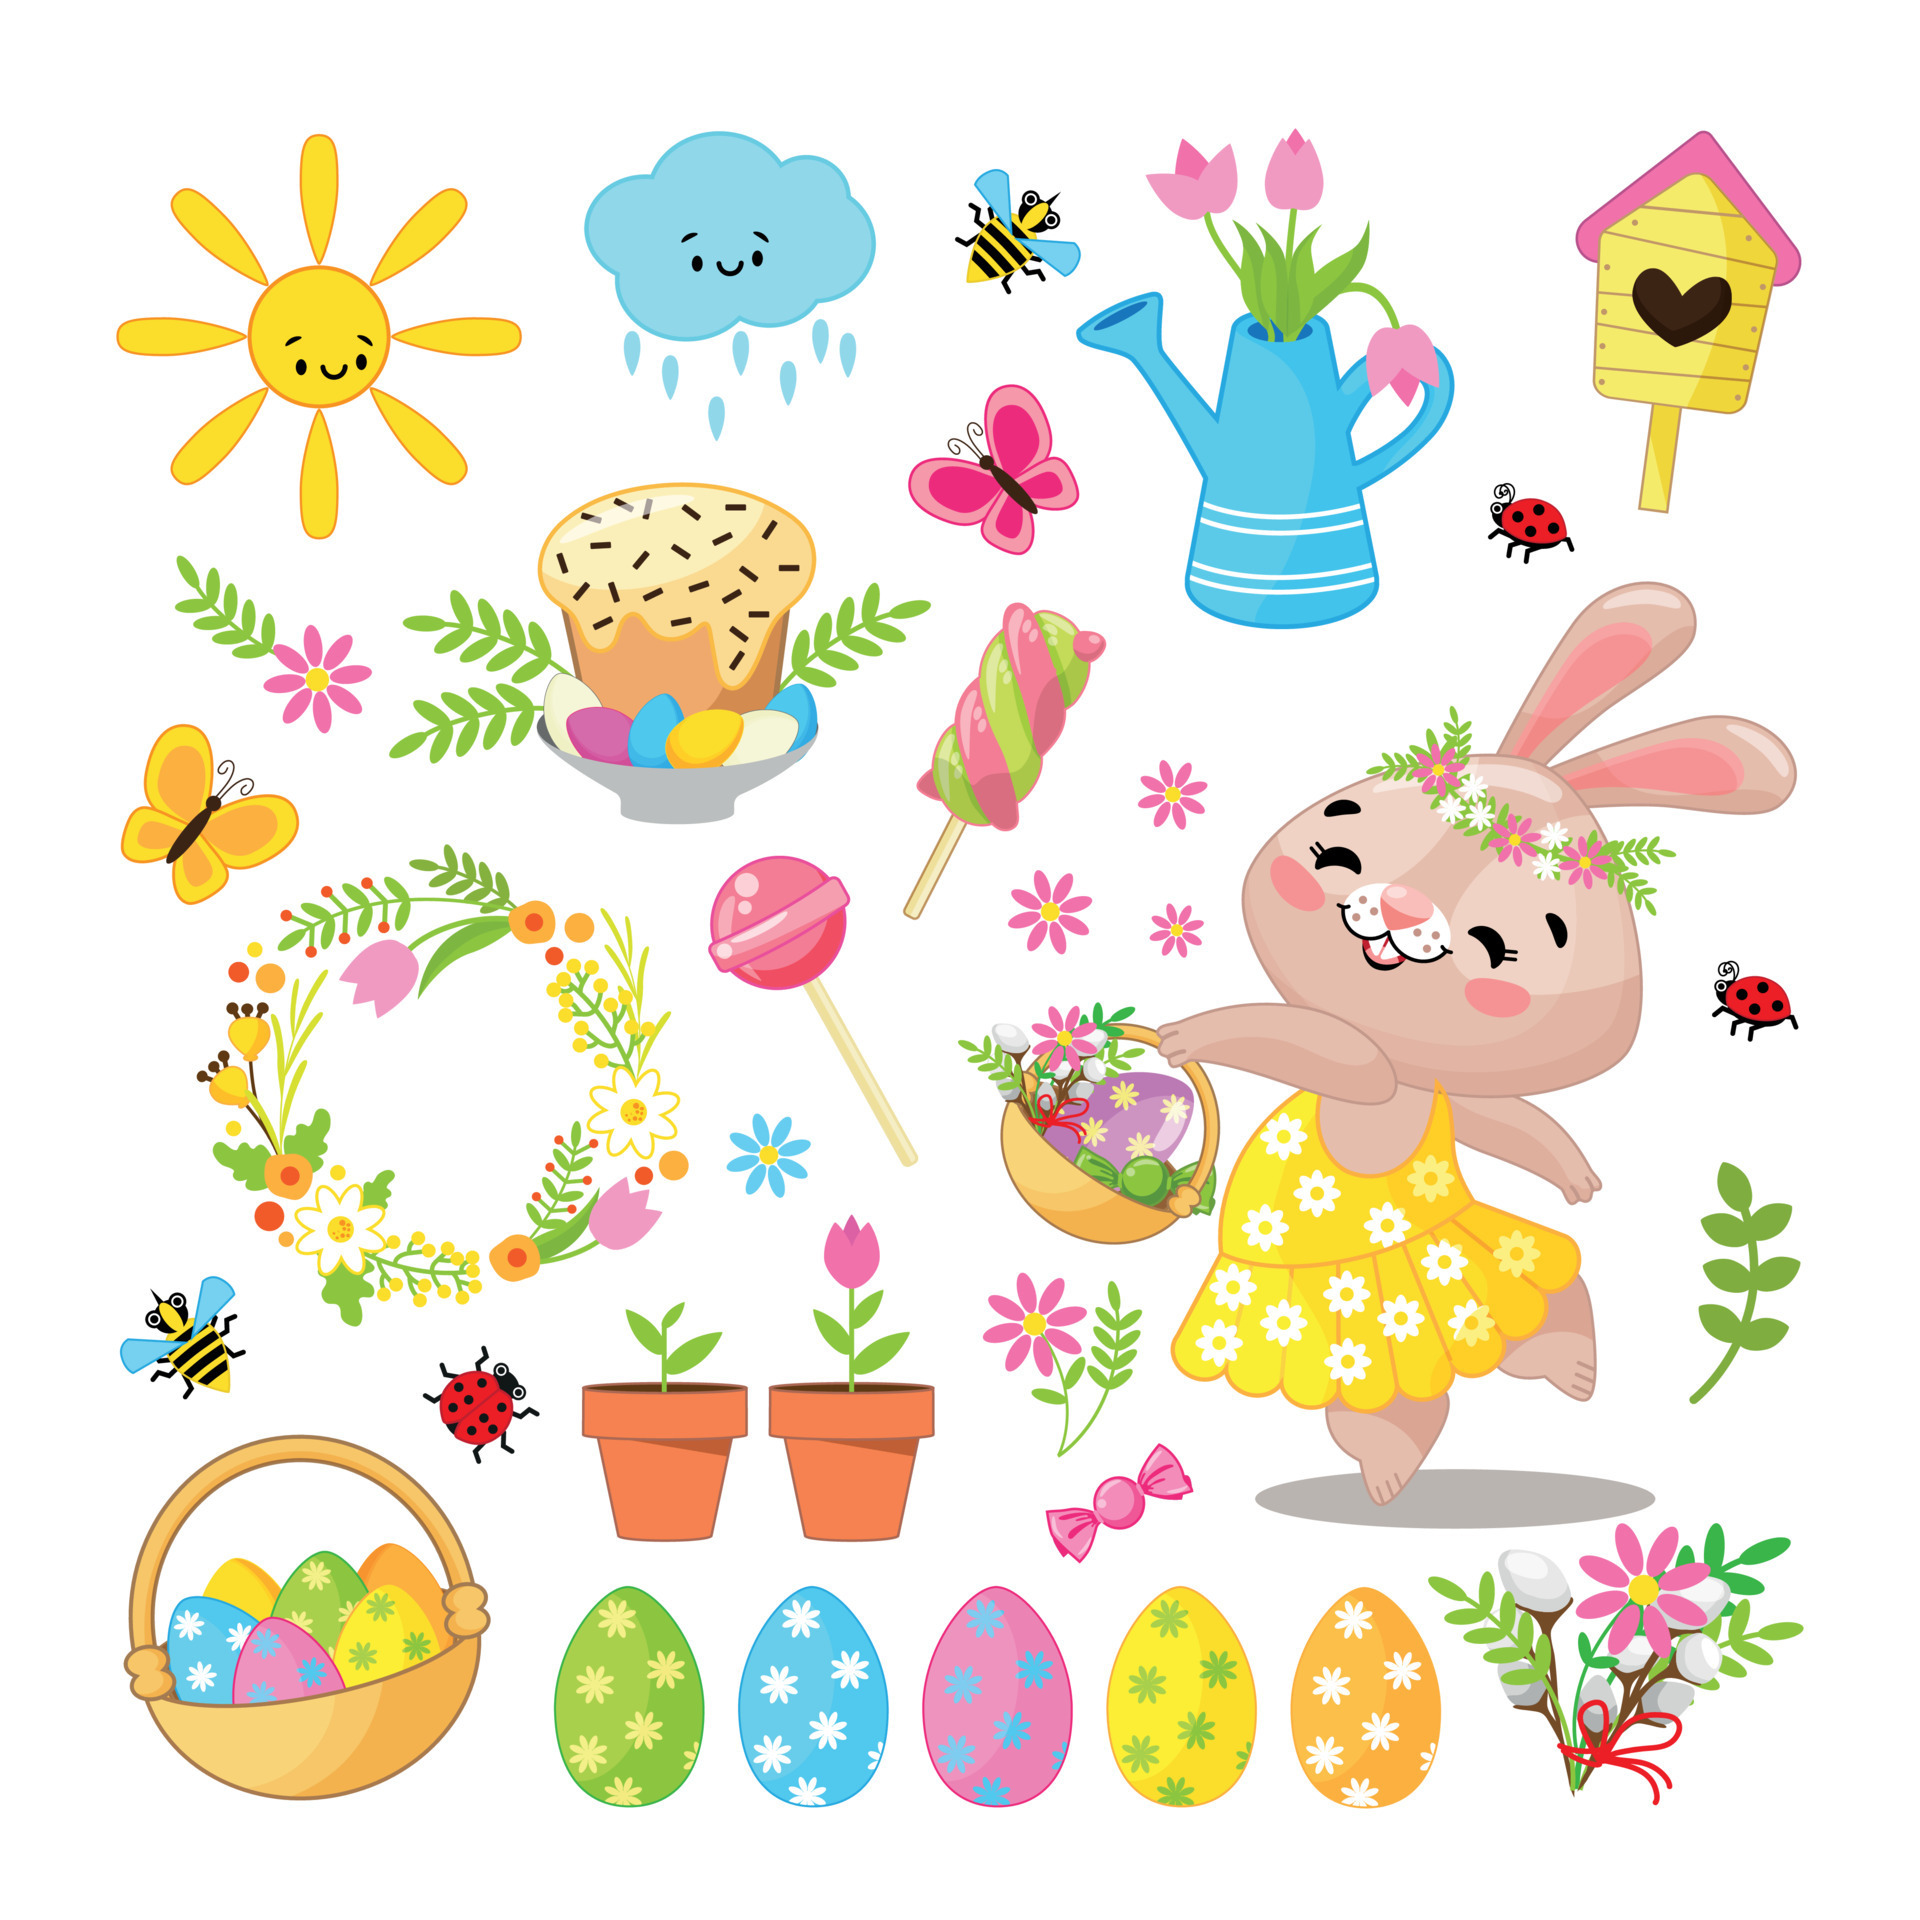 Easter Set Of Design Elements And Images In Cartoon Style On The Theme Of  Easter. Easter Bunny, Flowers, Birds, Painted Eggs On White Background,  Isolated Cut Out Object. Rabbit Ballerina With Basket